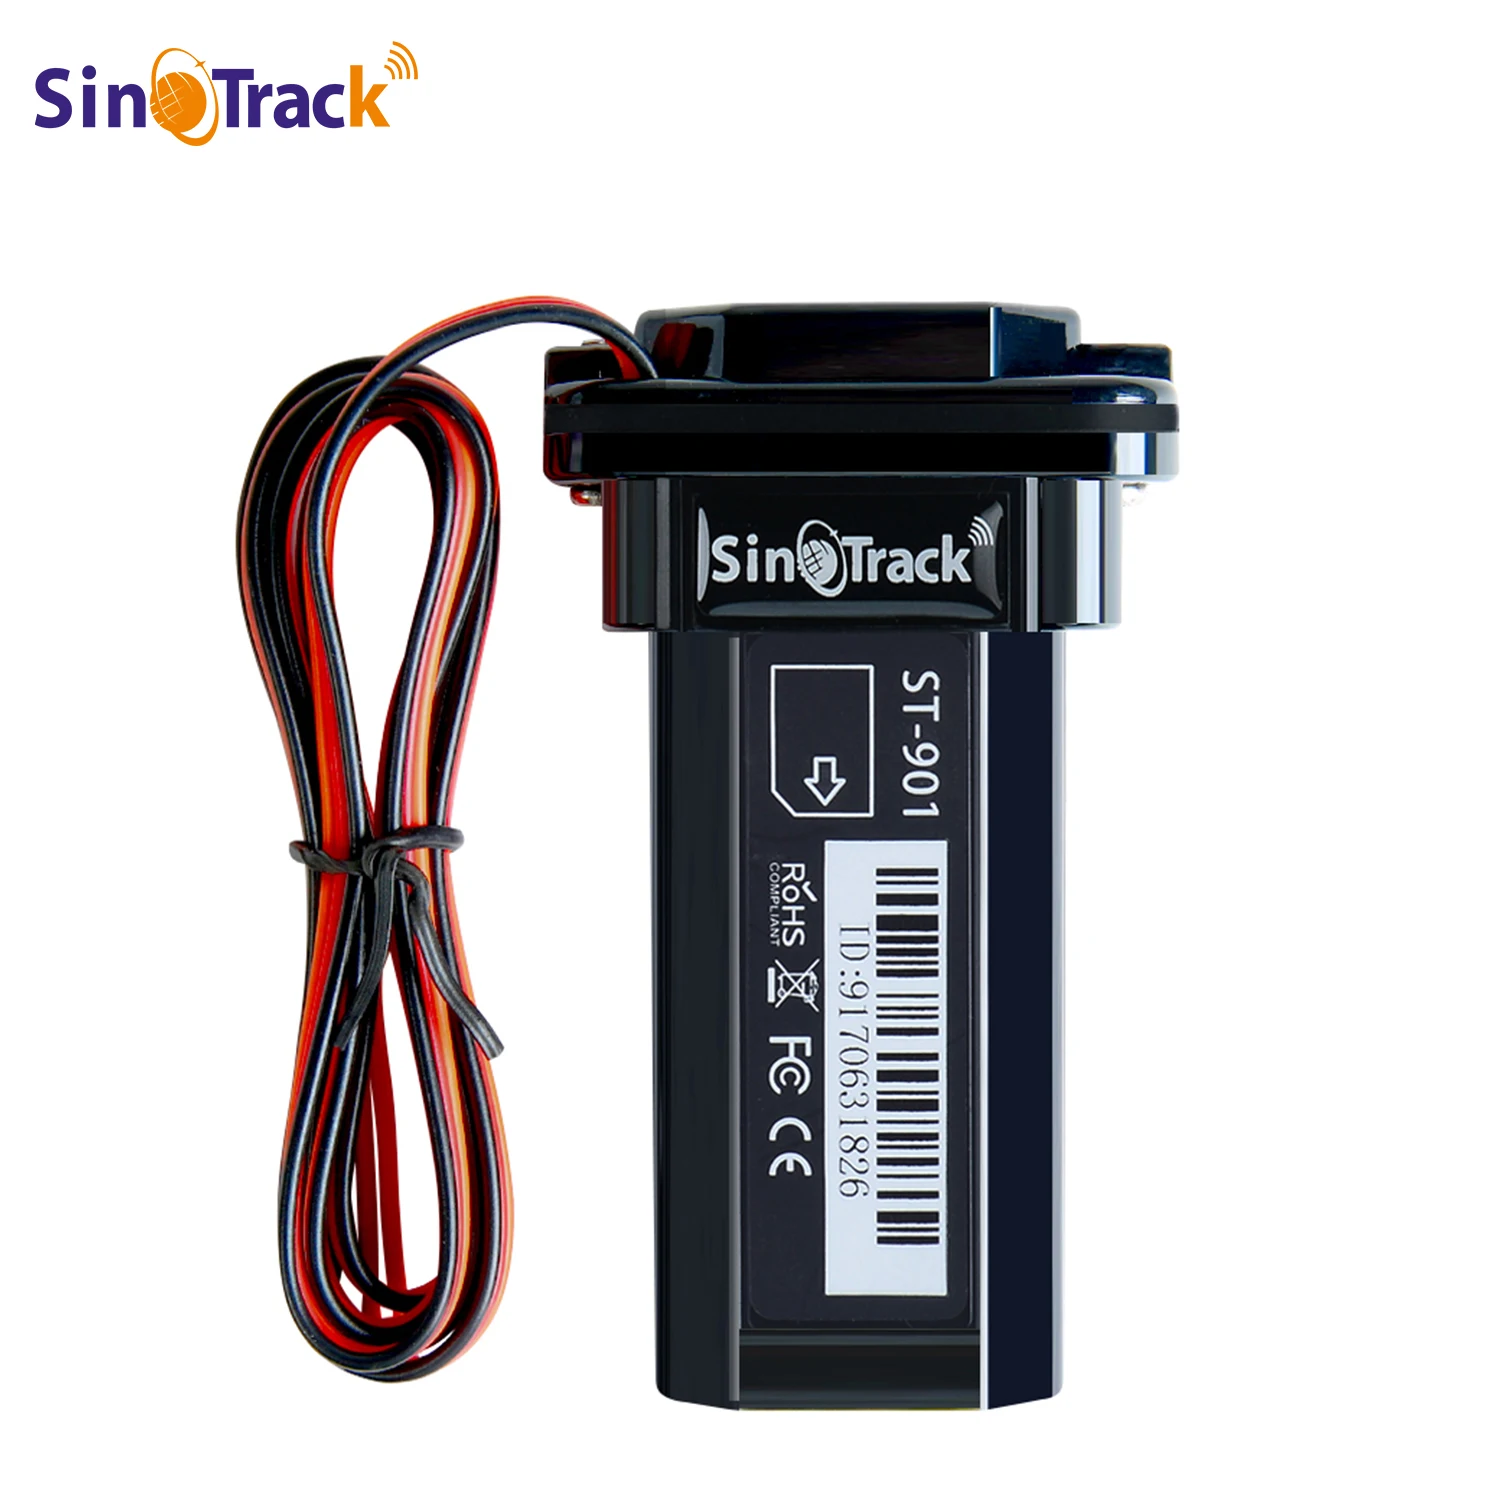 SinoTrack GPS Tracker ST-901 Vehicle Tracking Device Waterproof motorcycle Car - £22.97 GBP+